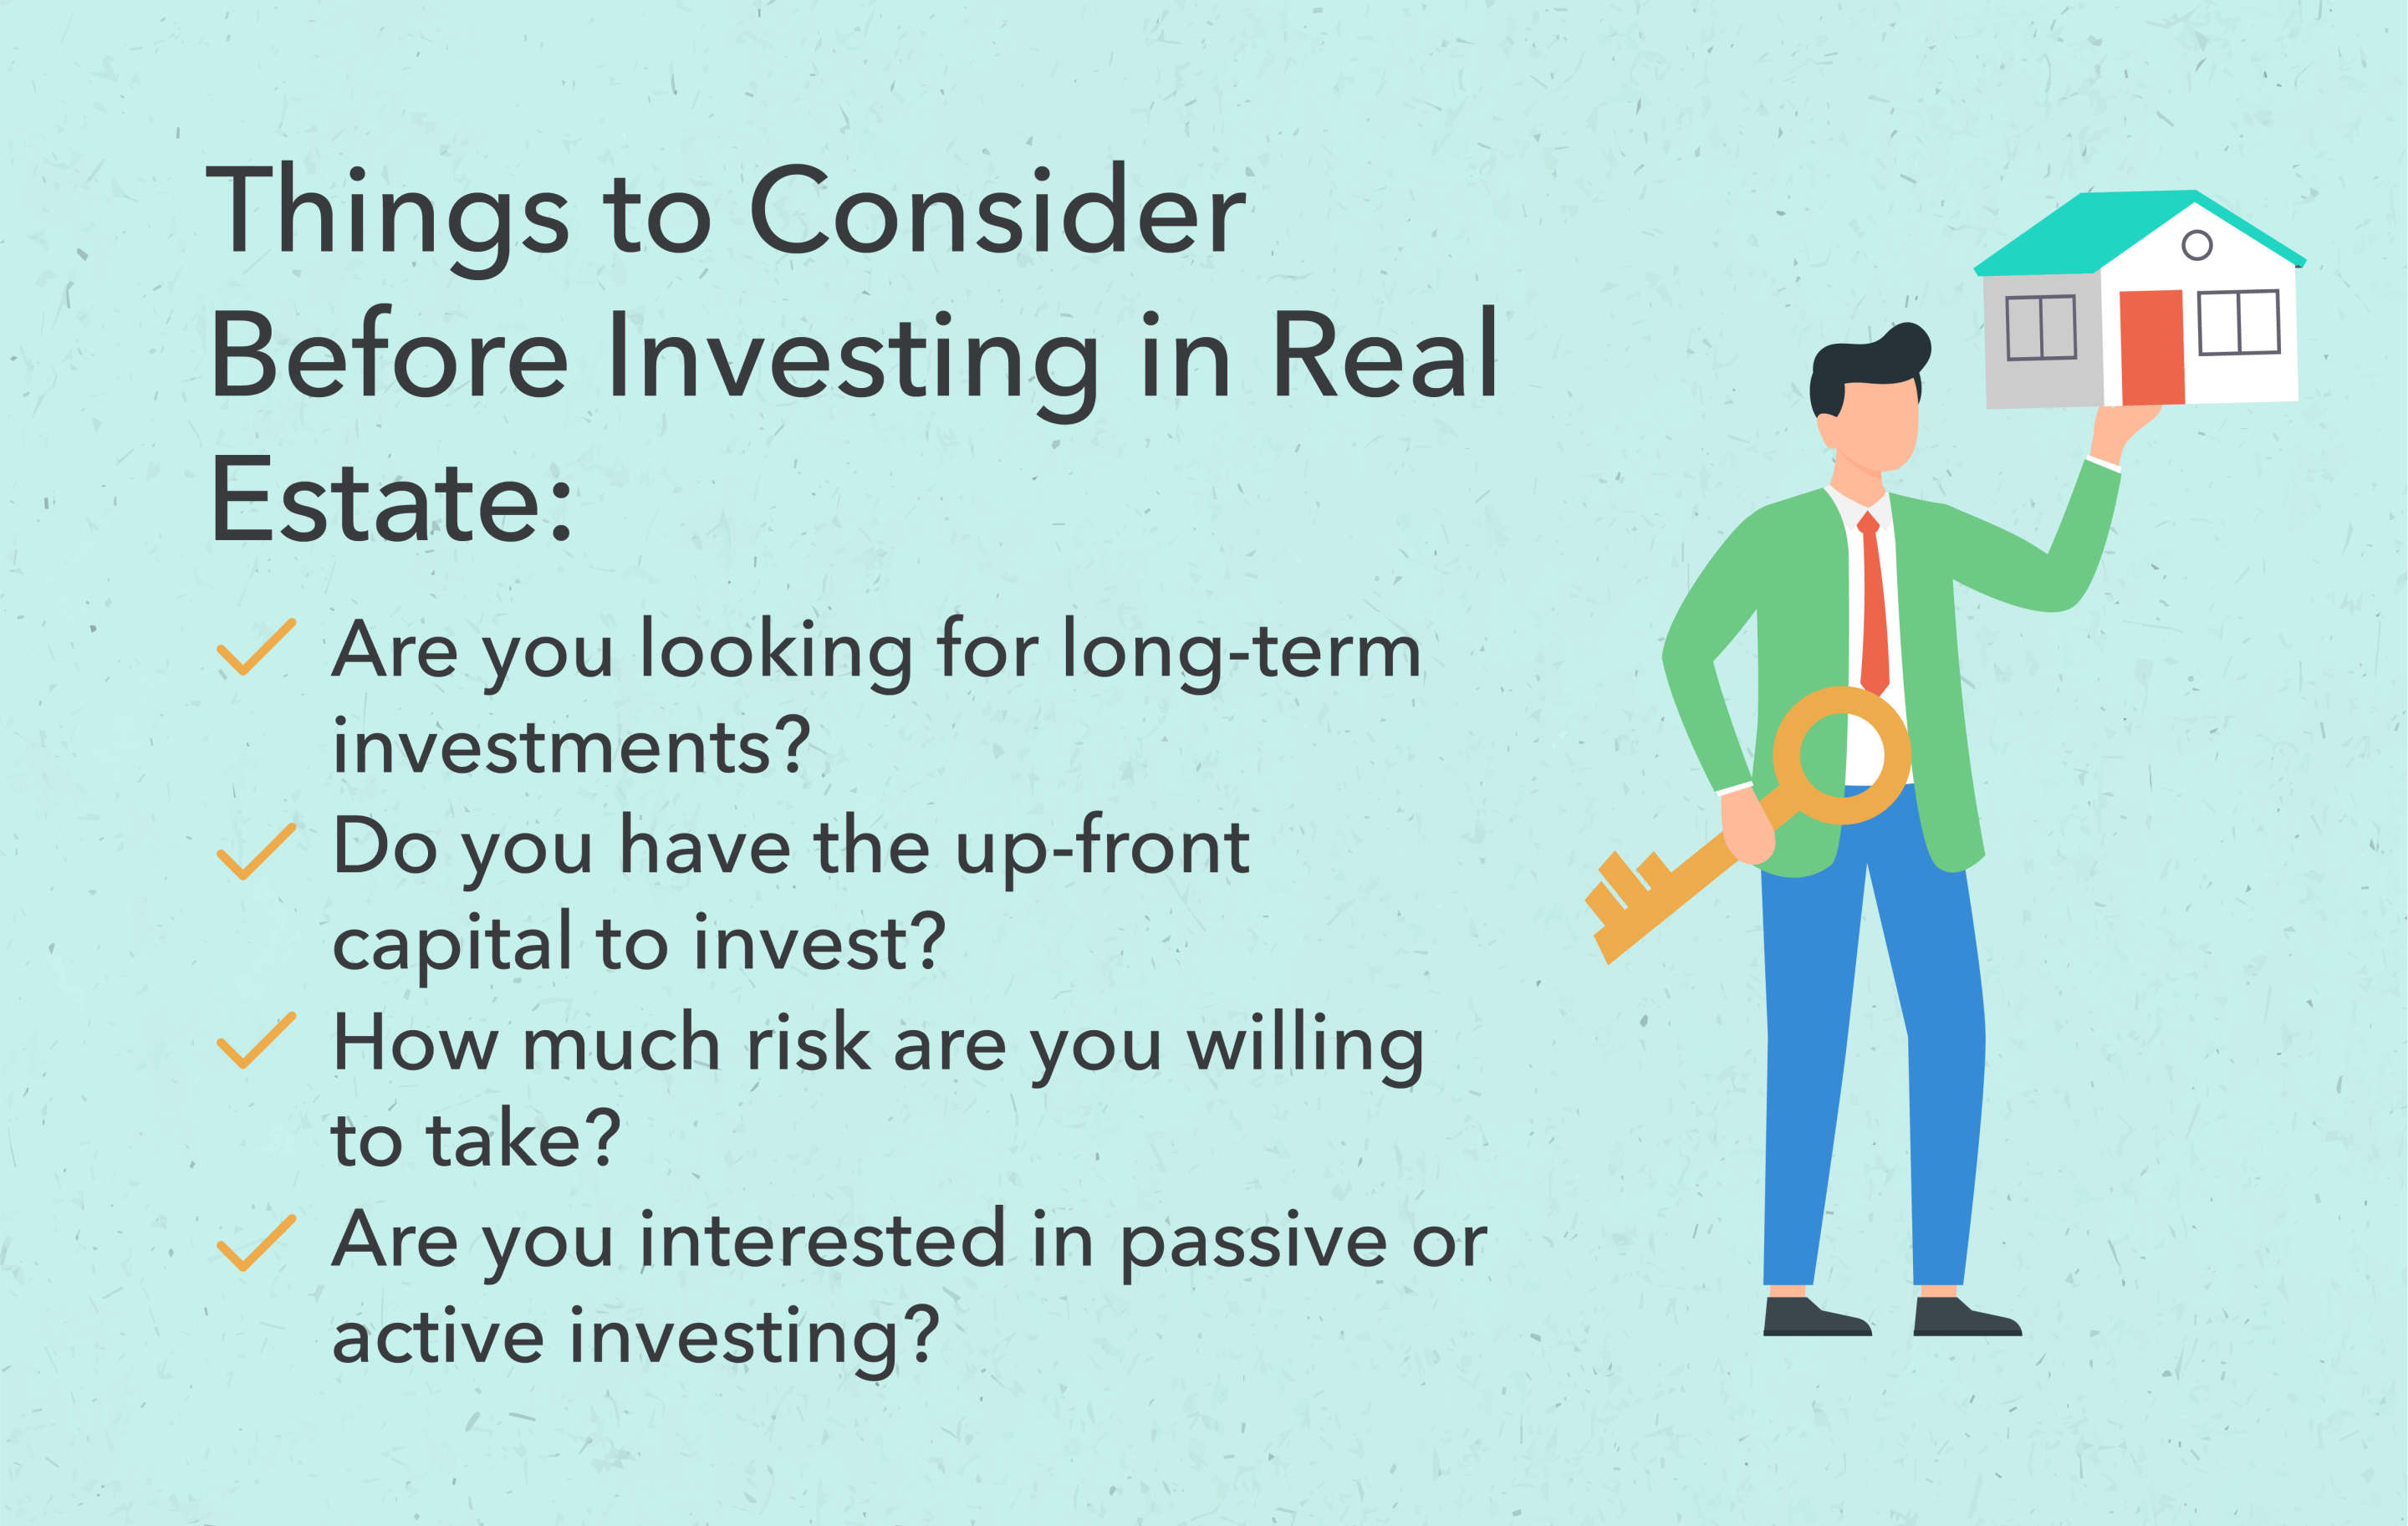 What Are the Risks Associated With Investing in Real Estate?